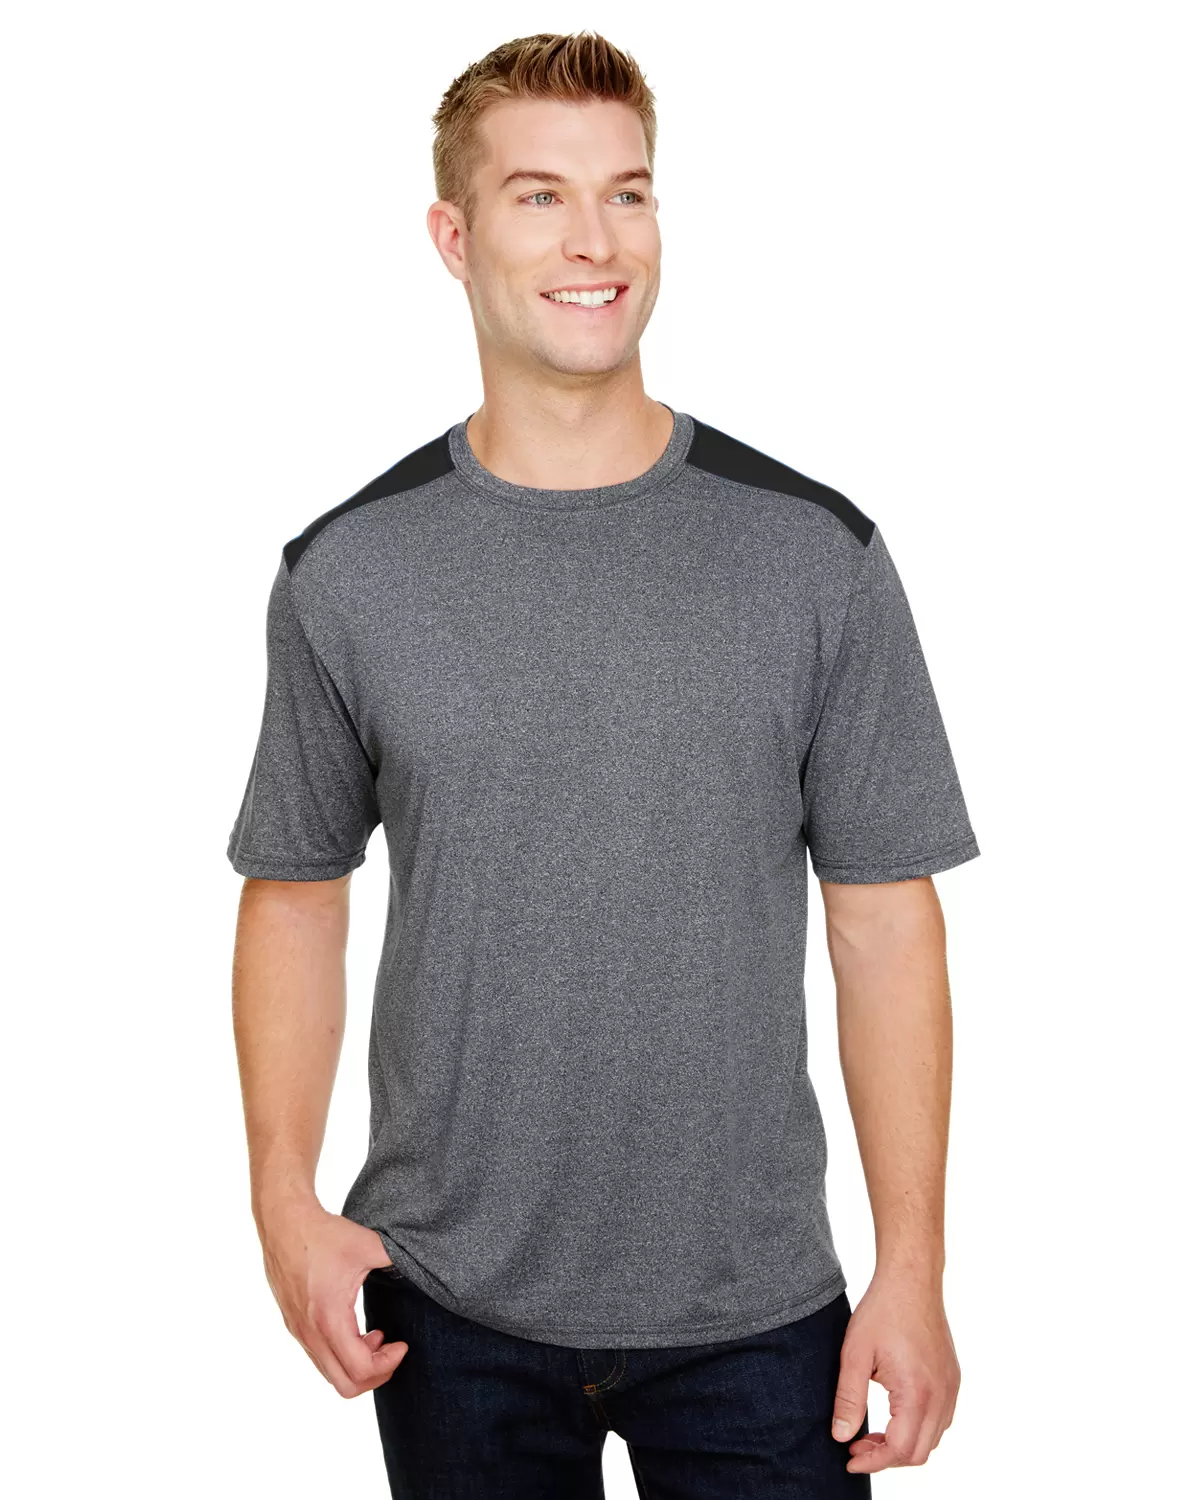 A4 Apparel N3100 Men's Tourney Heather Color Block T-Shirt - From $6.95